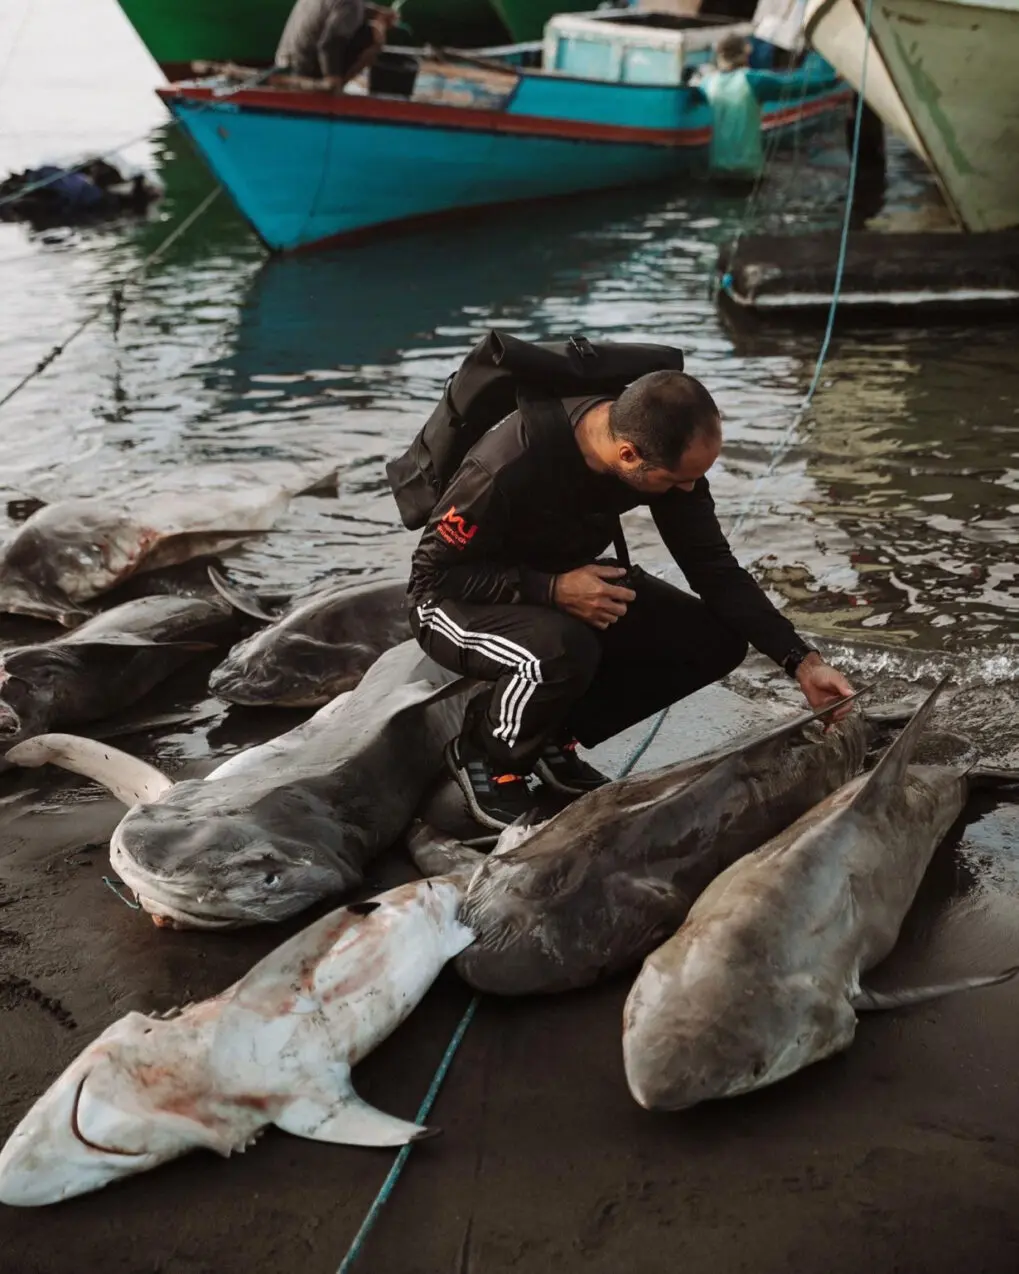 Marine scientist Diego Cardeñosa working with fisheries in South America to monitor shark catches.